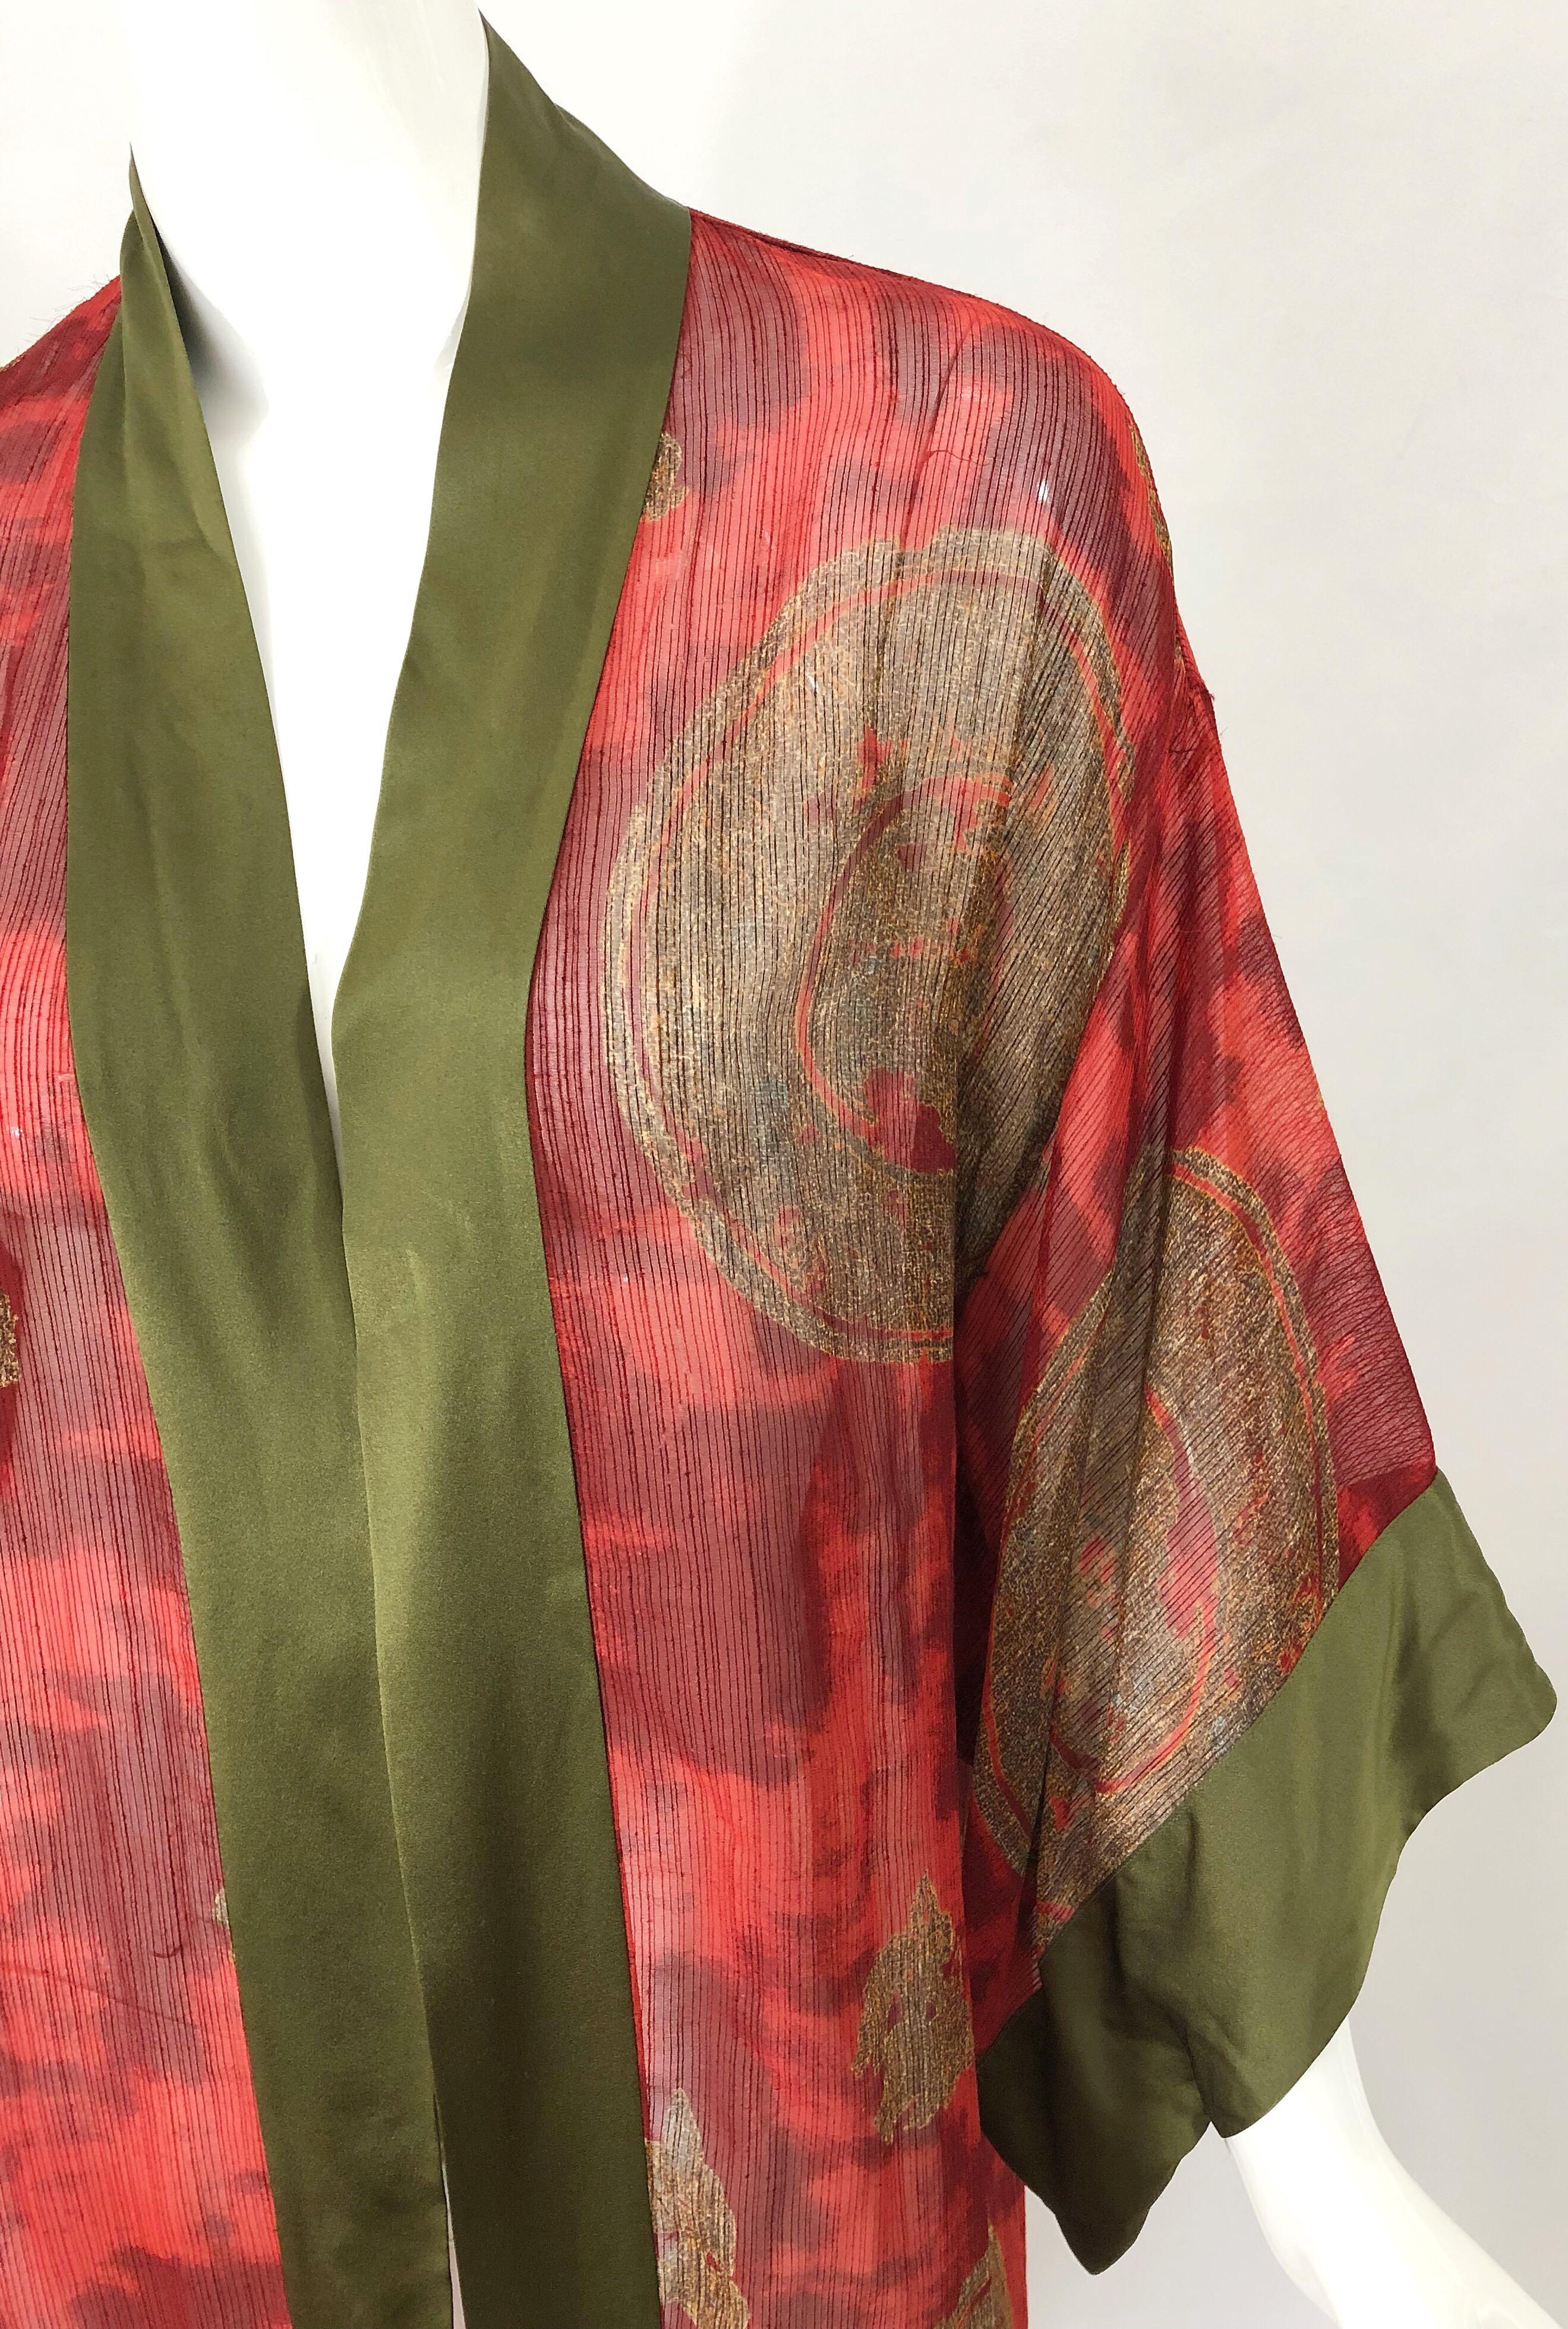 Vintage Holly's Harp Red Olive Green Gold Silk Chiffon Sheer Kimono Jacket For Sale 1